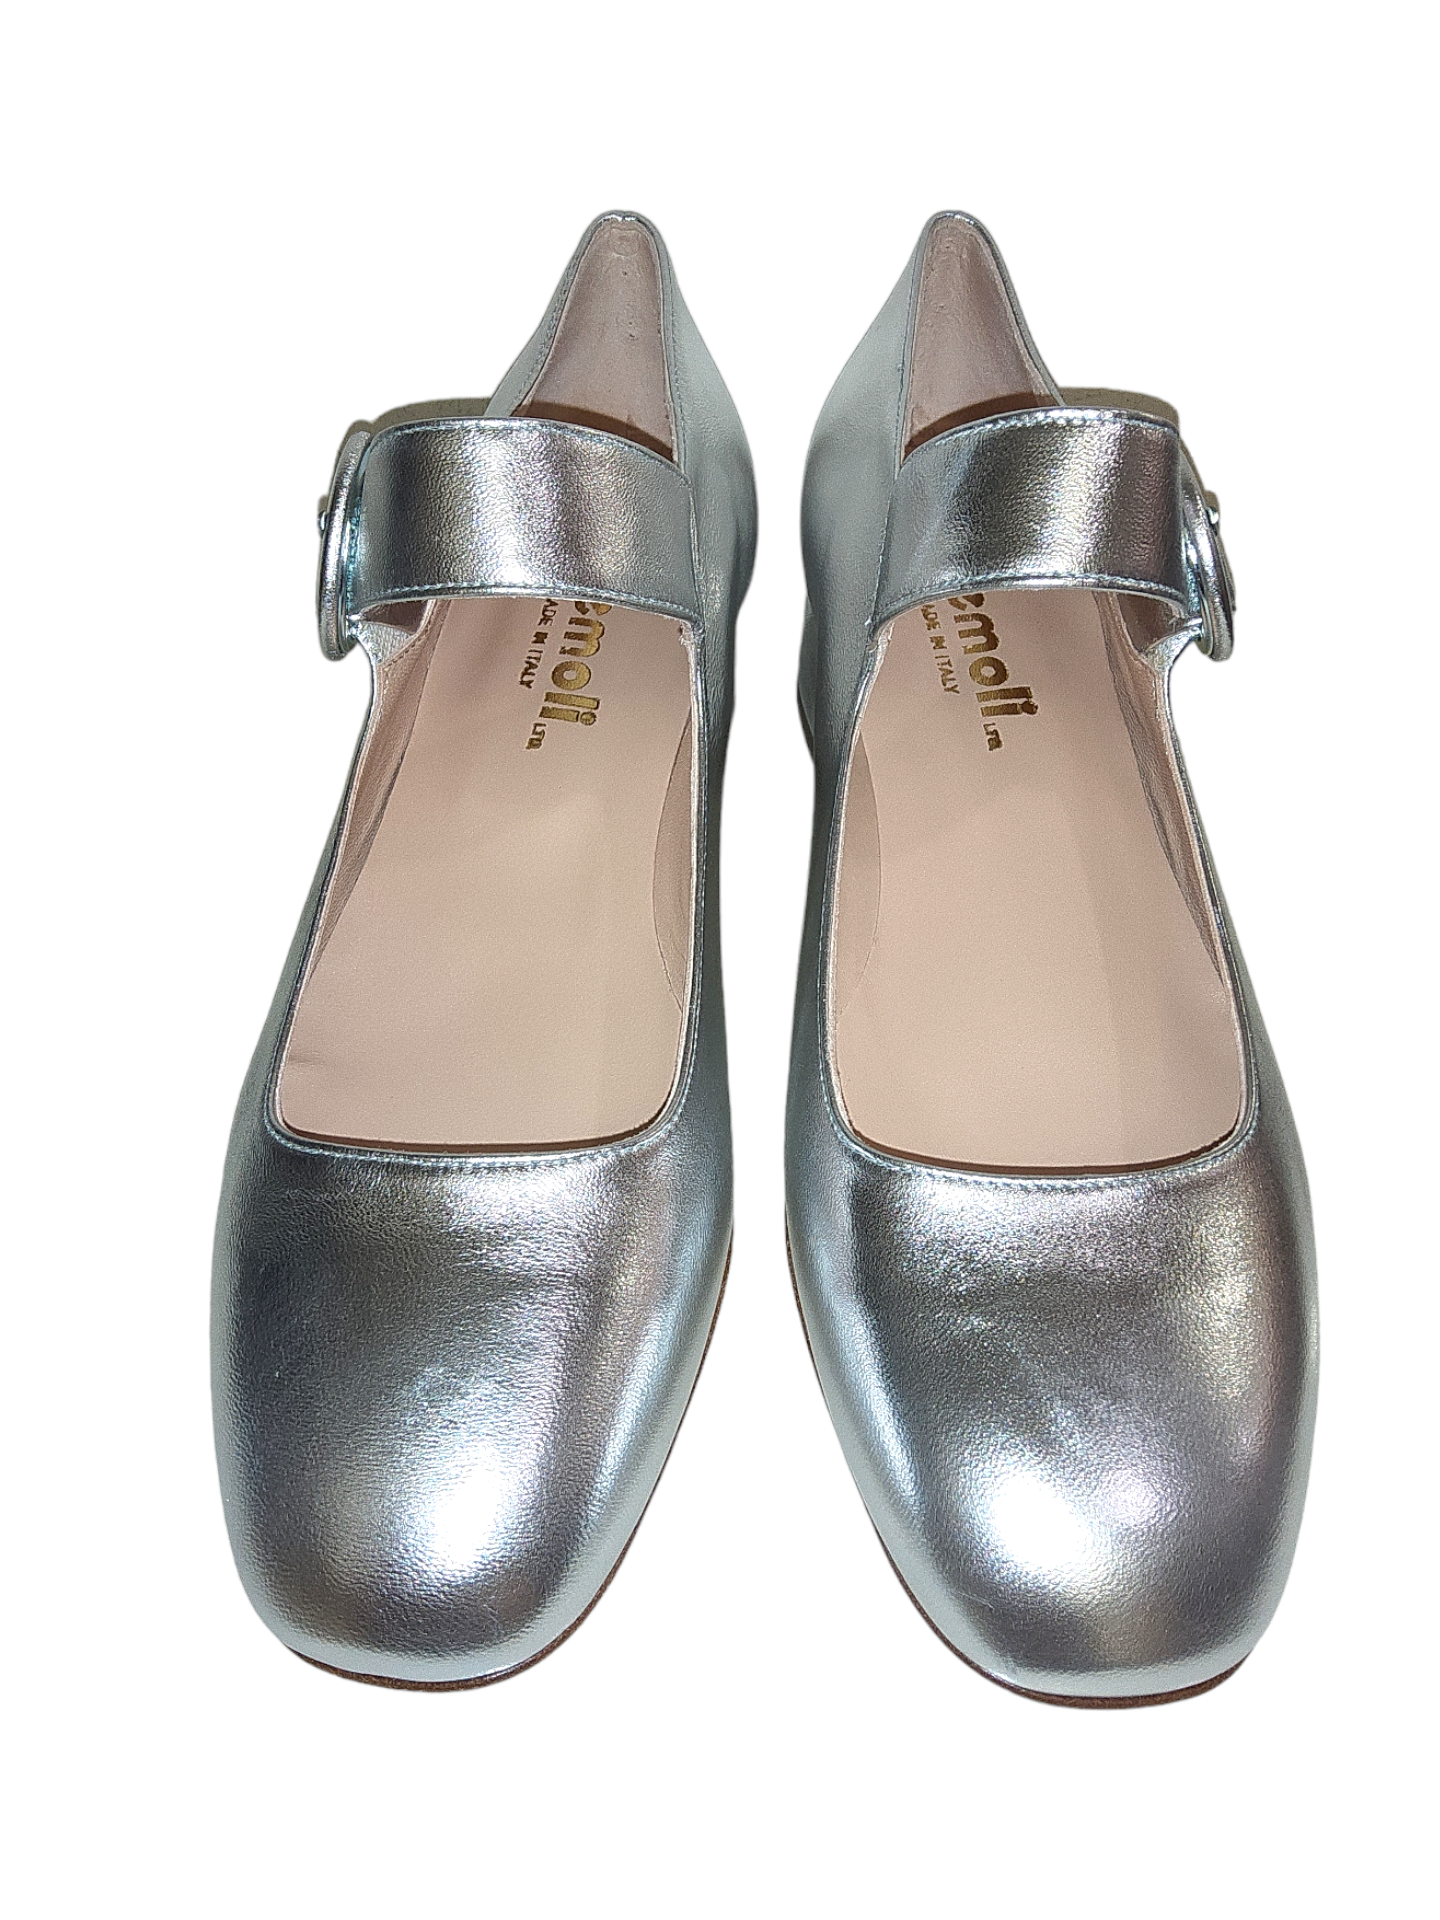 Silver leather pumps